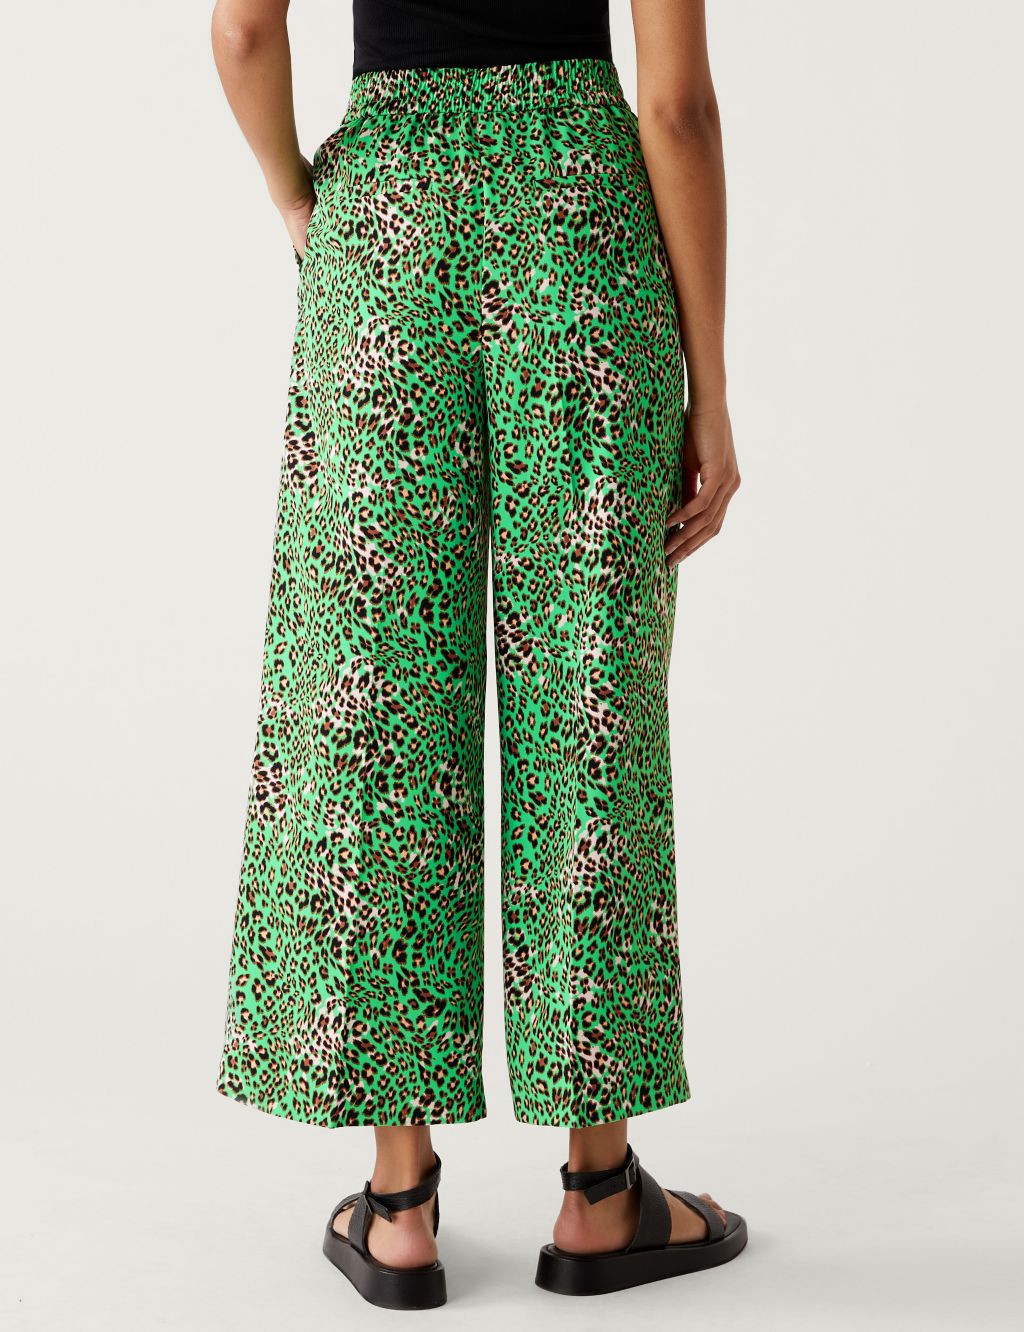 Crepe Animal Print Wide Leg Cropped Trousers image 4